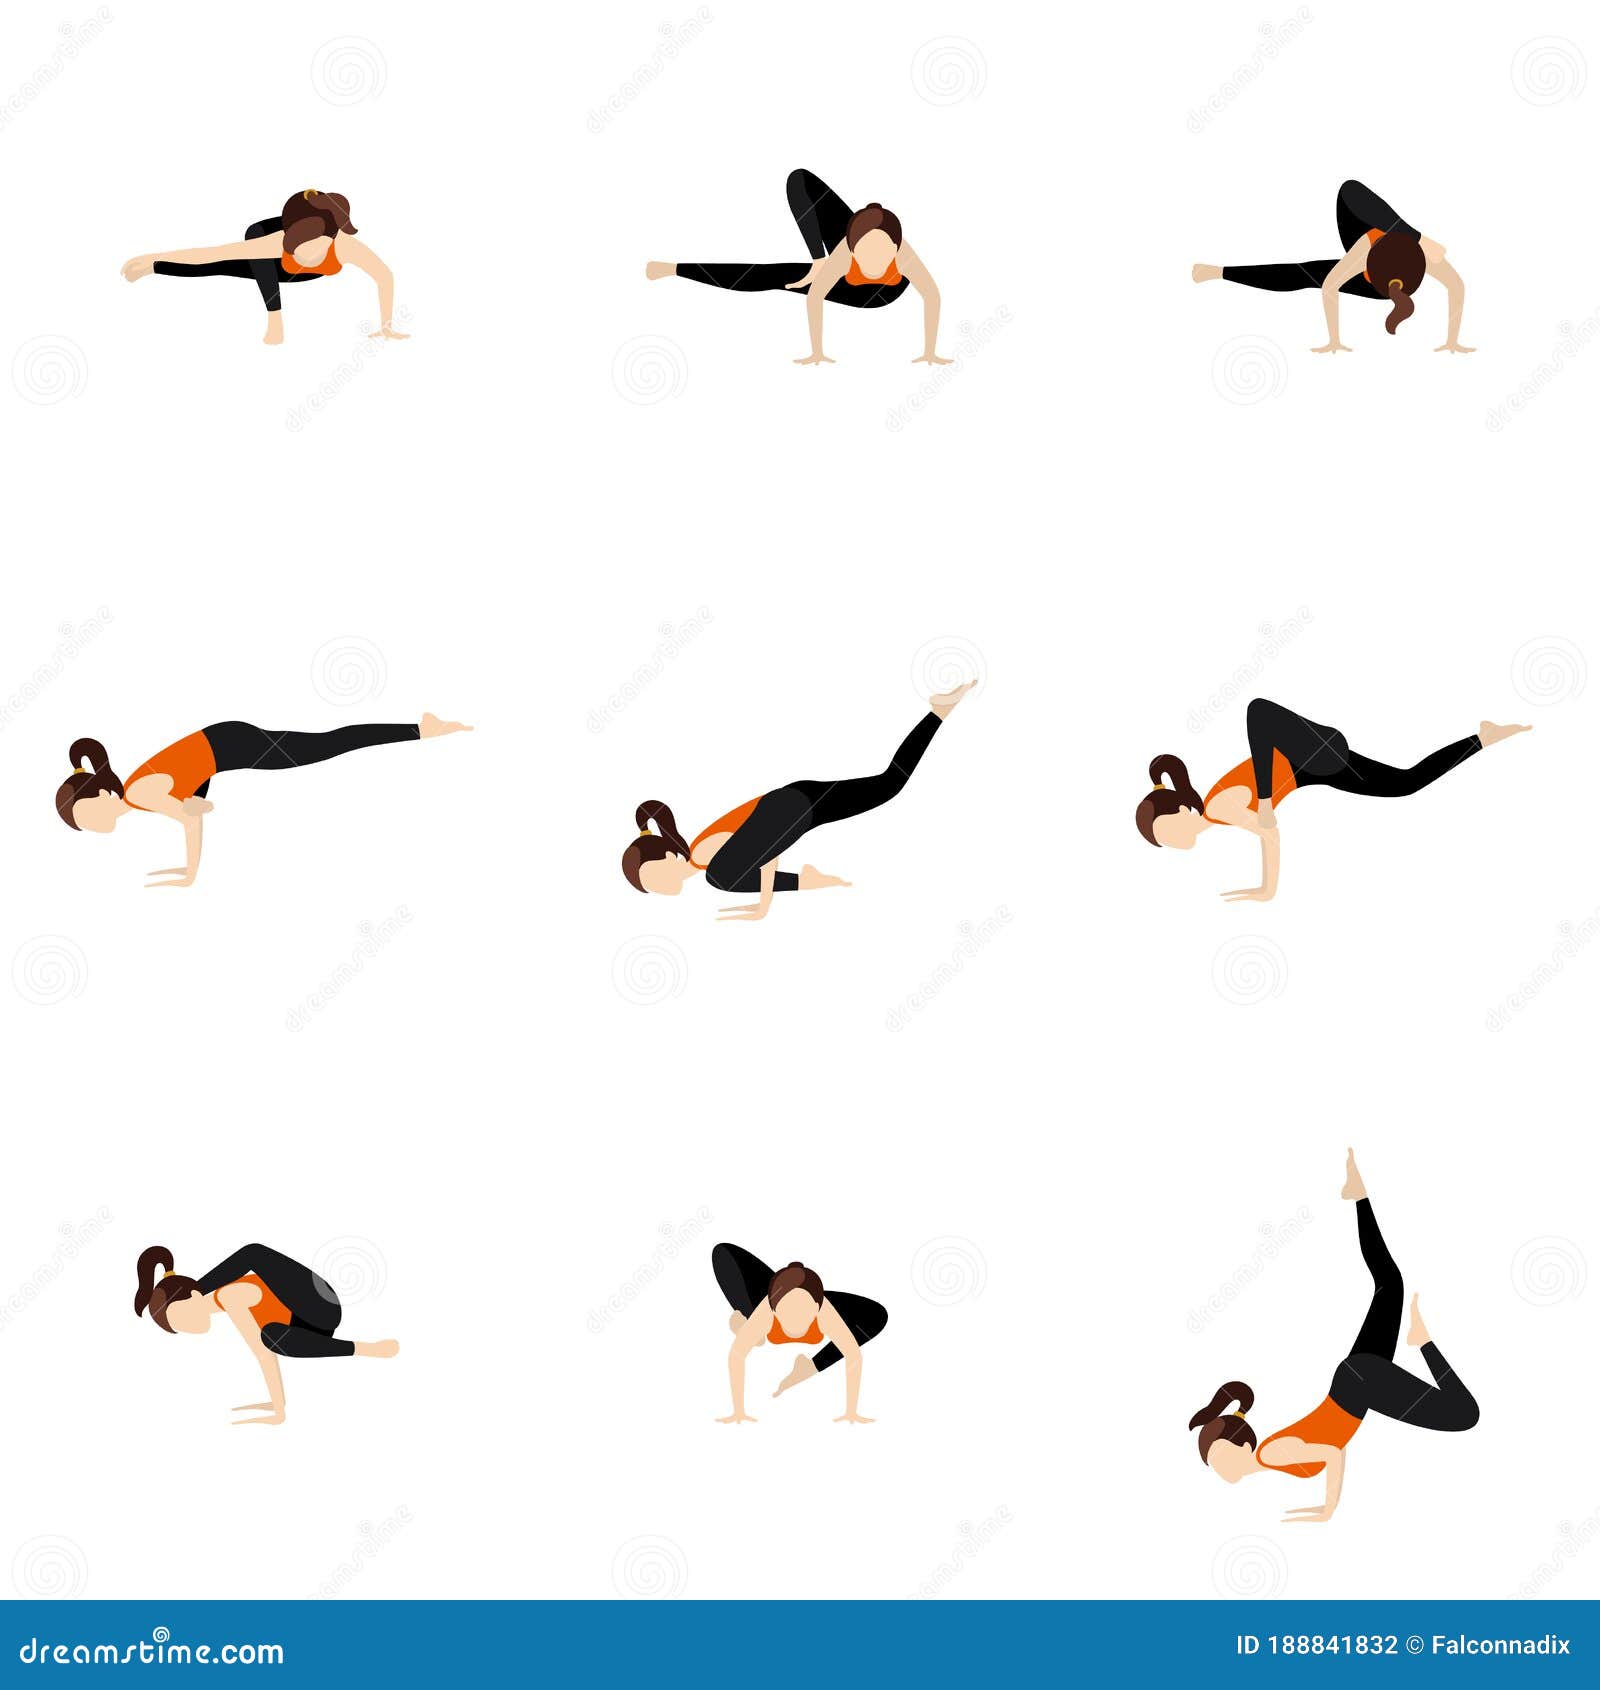 Difficult Advanced Yoga Pose By Attractive Female, On White Background,  Viewed From The Front Stock Photo, Picture and Royalty Free Image. Image  16038620.